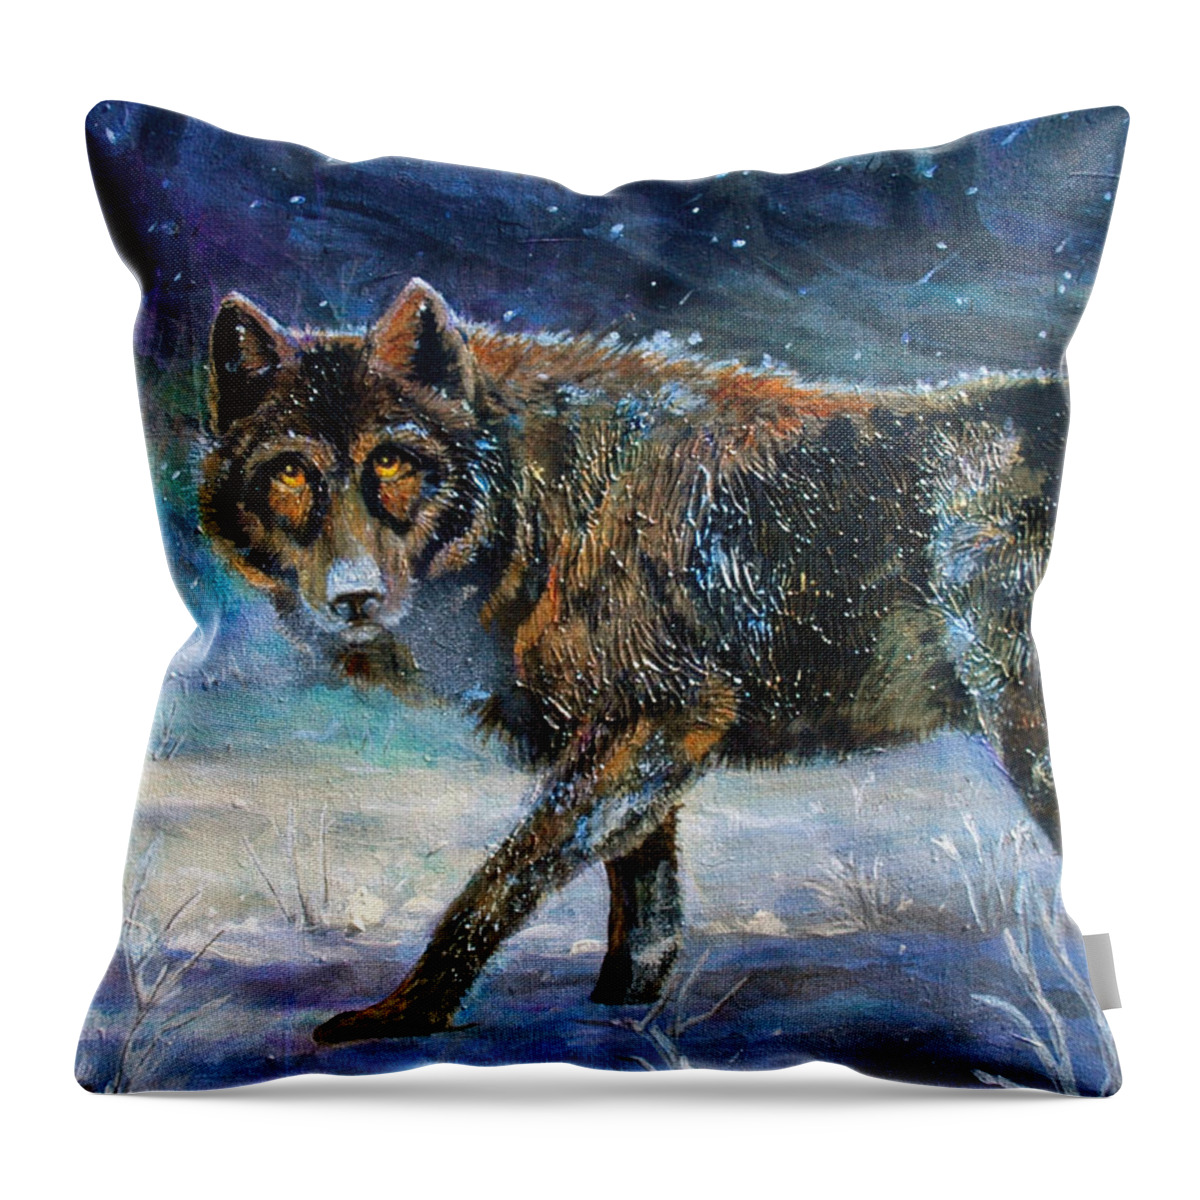 Wolf Throw Pillow featuring the painting Unexpected Encounter by Cynthia Westbrook